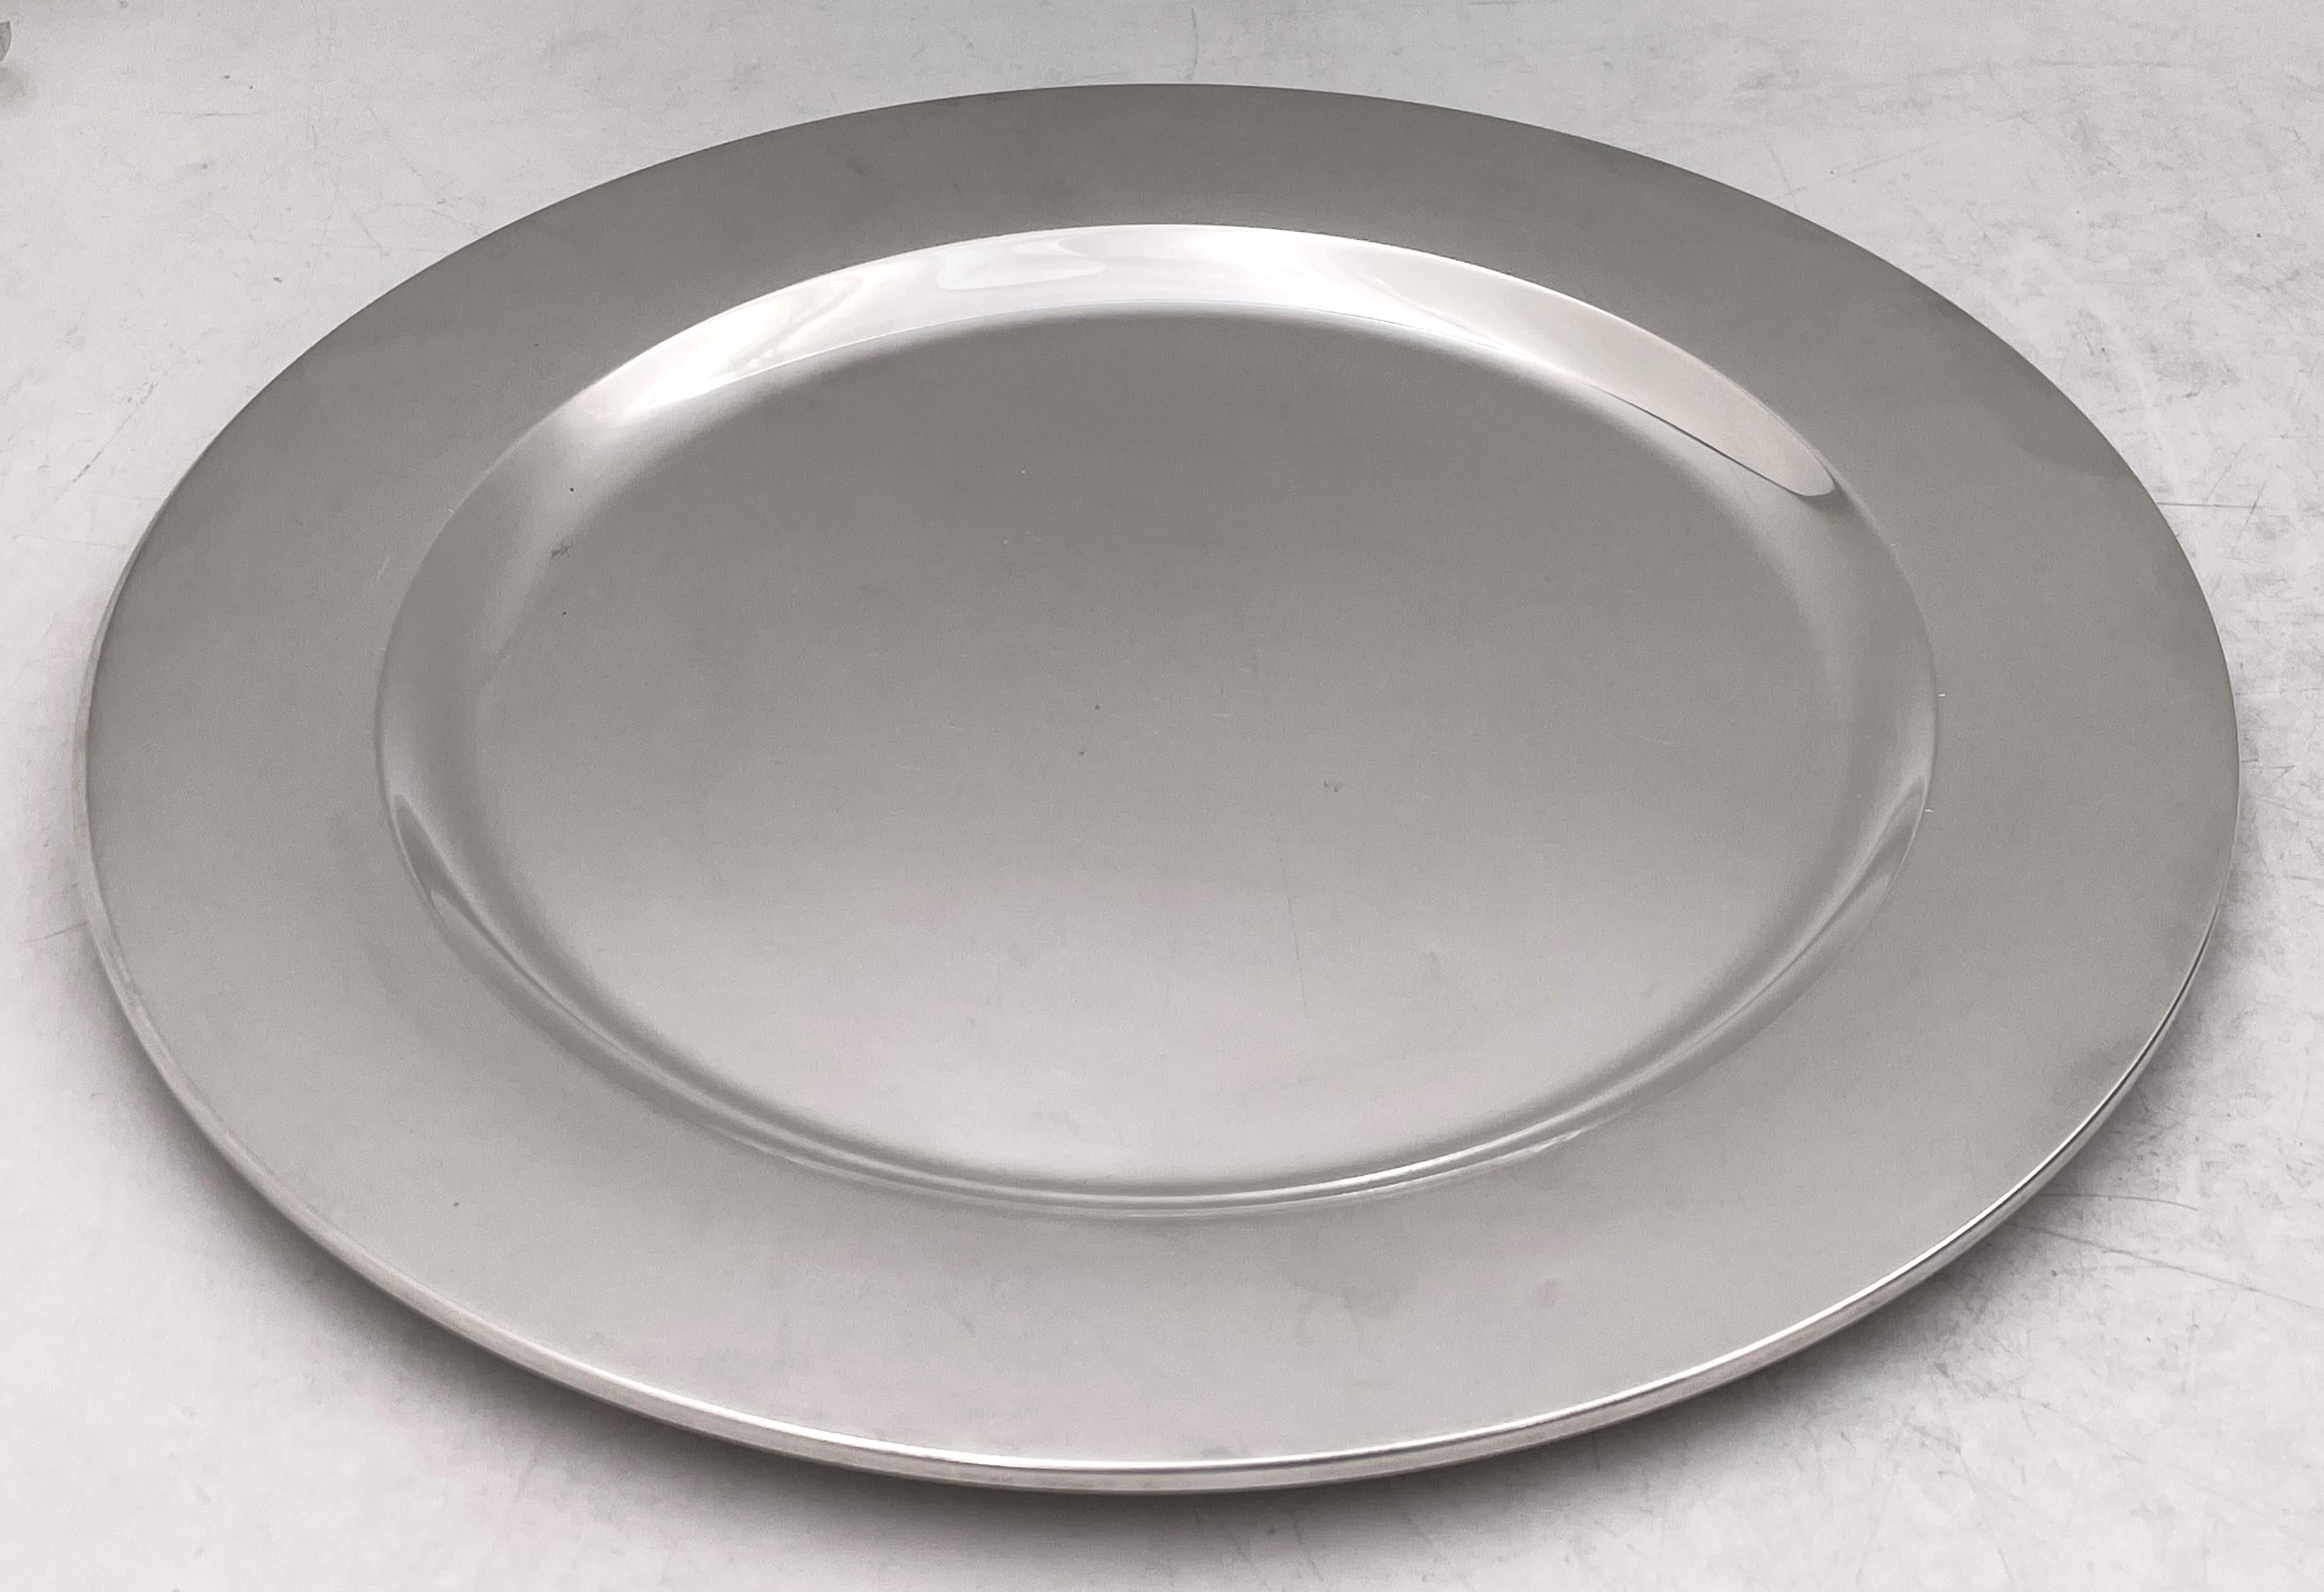 Georg Jensen sterling silver finely hand-hammered plate or charger, designed by Henning Koppel in the late 1950s, in pattern number 1074, and in Mid-Century Modern style in an elegant, geometric design. It measures 11'' in diameter (inner diameter